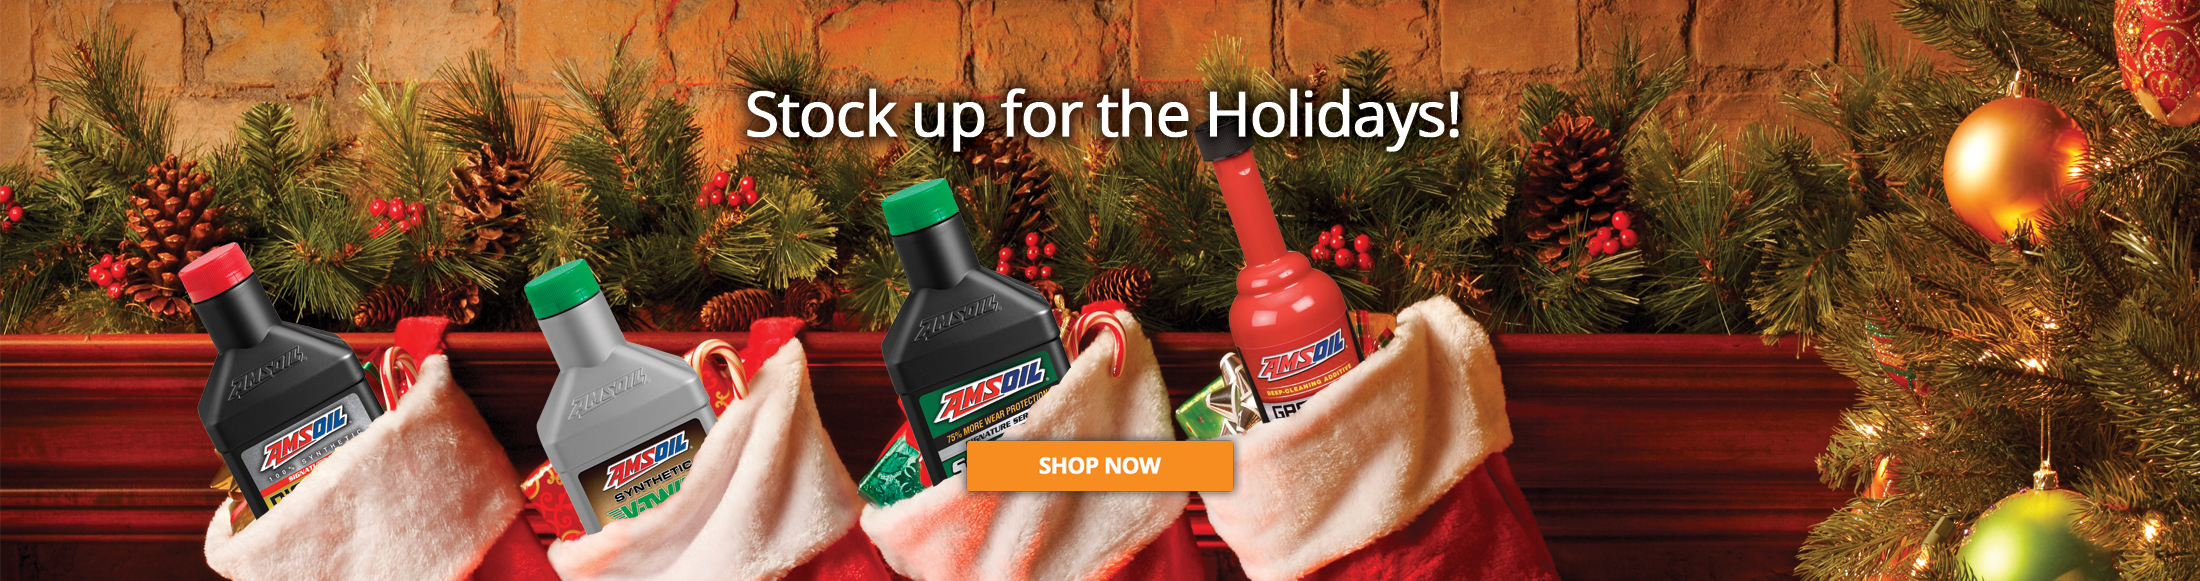 Stock up for the holidays - Shop Now.